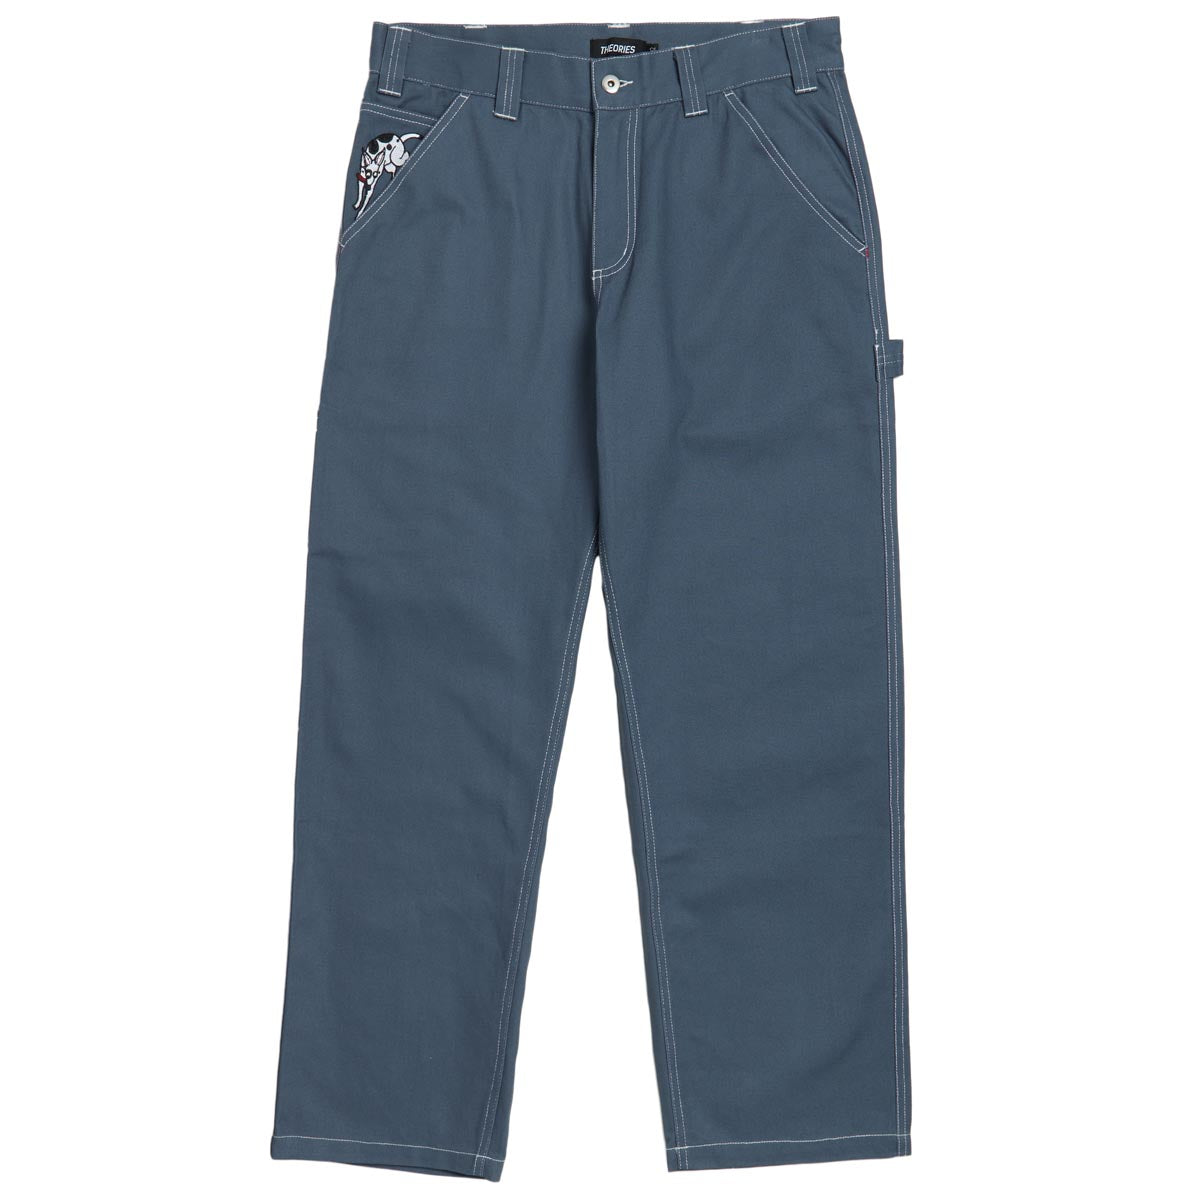 Theories Piano Trap Carpenter Pants - Slate Blue Contrast Stitch image 1